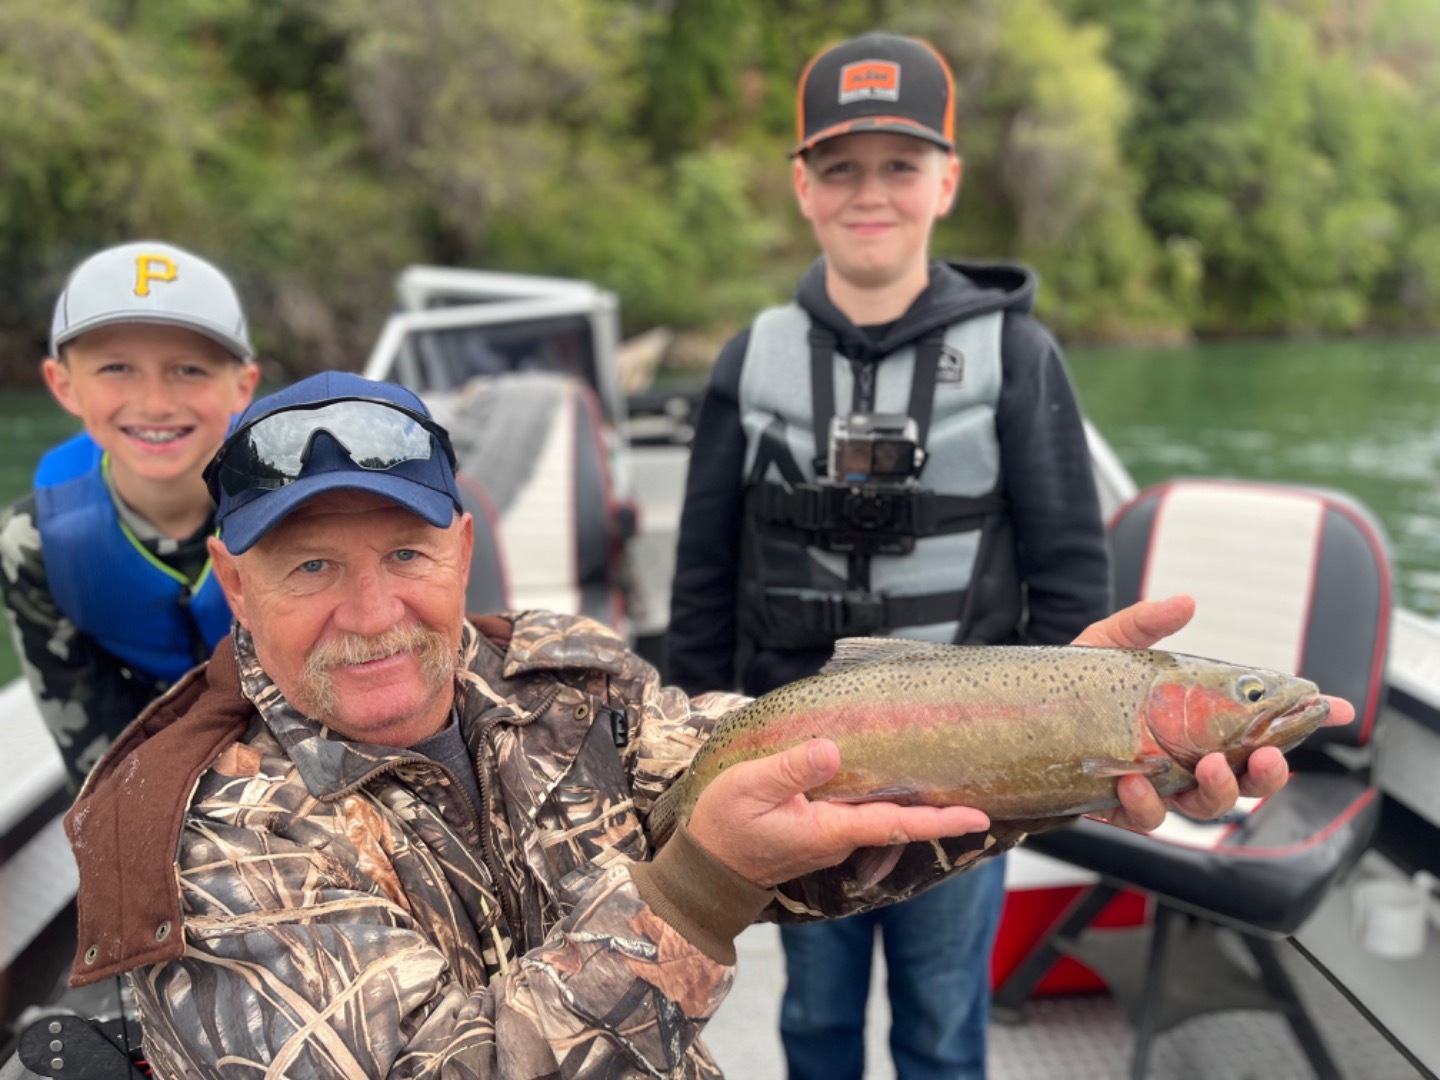 Trout Fishing In Redding